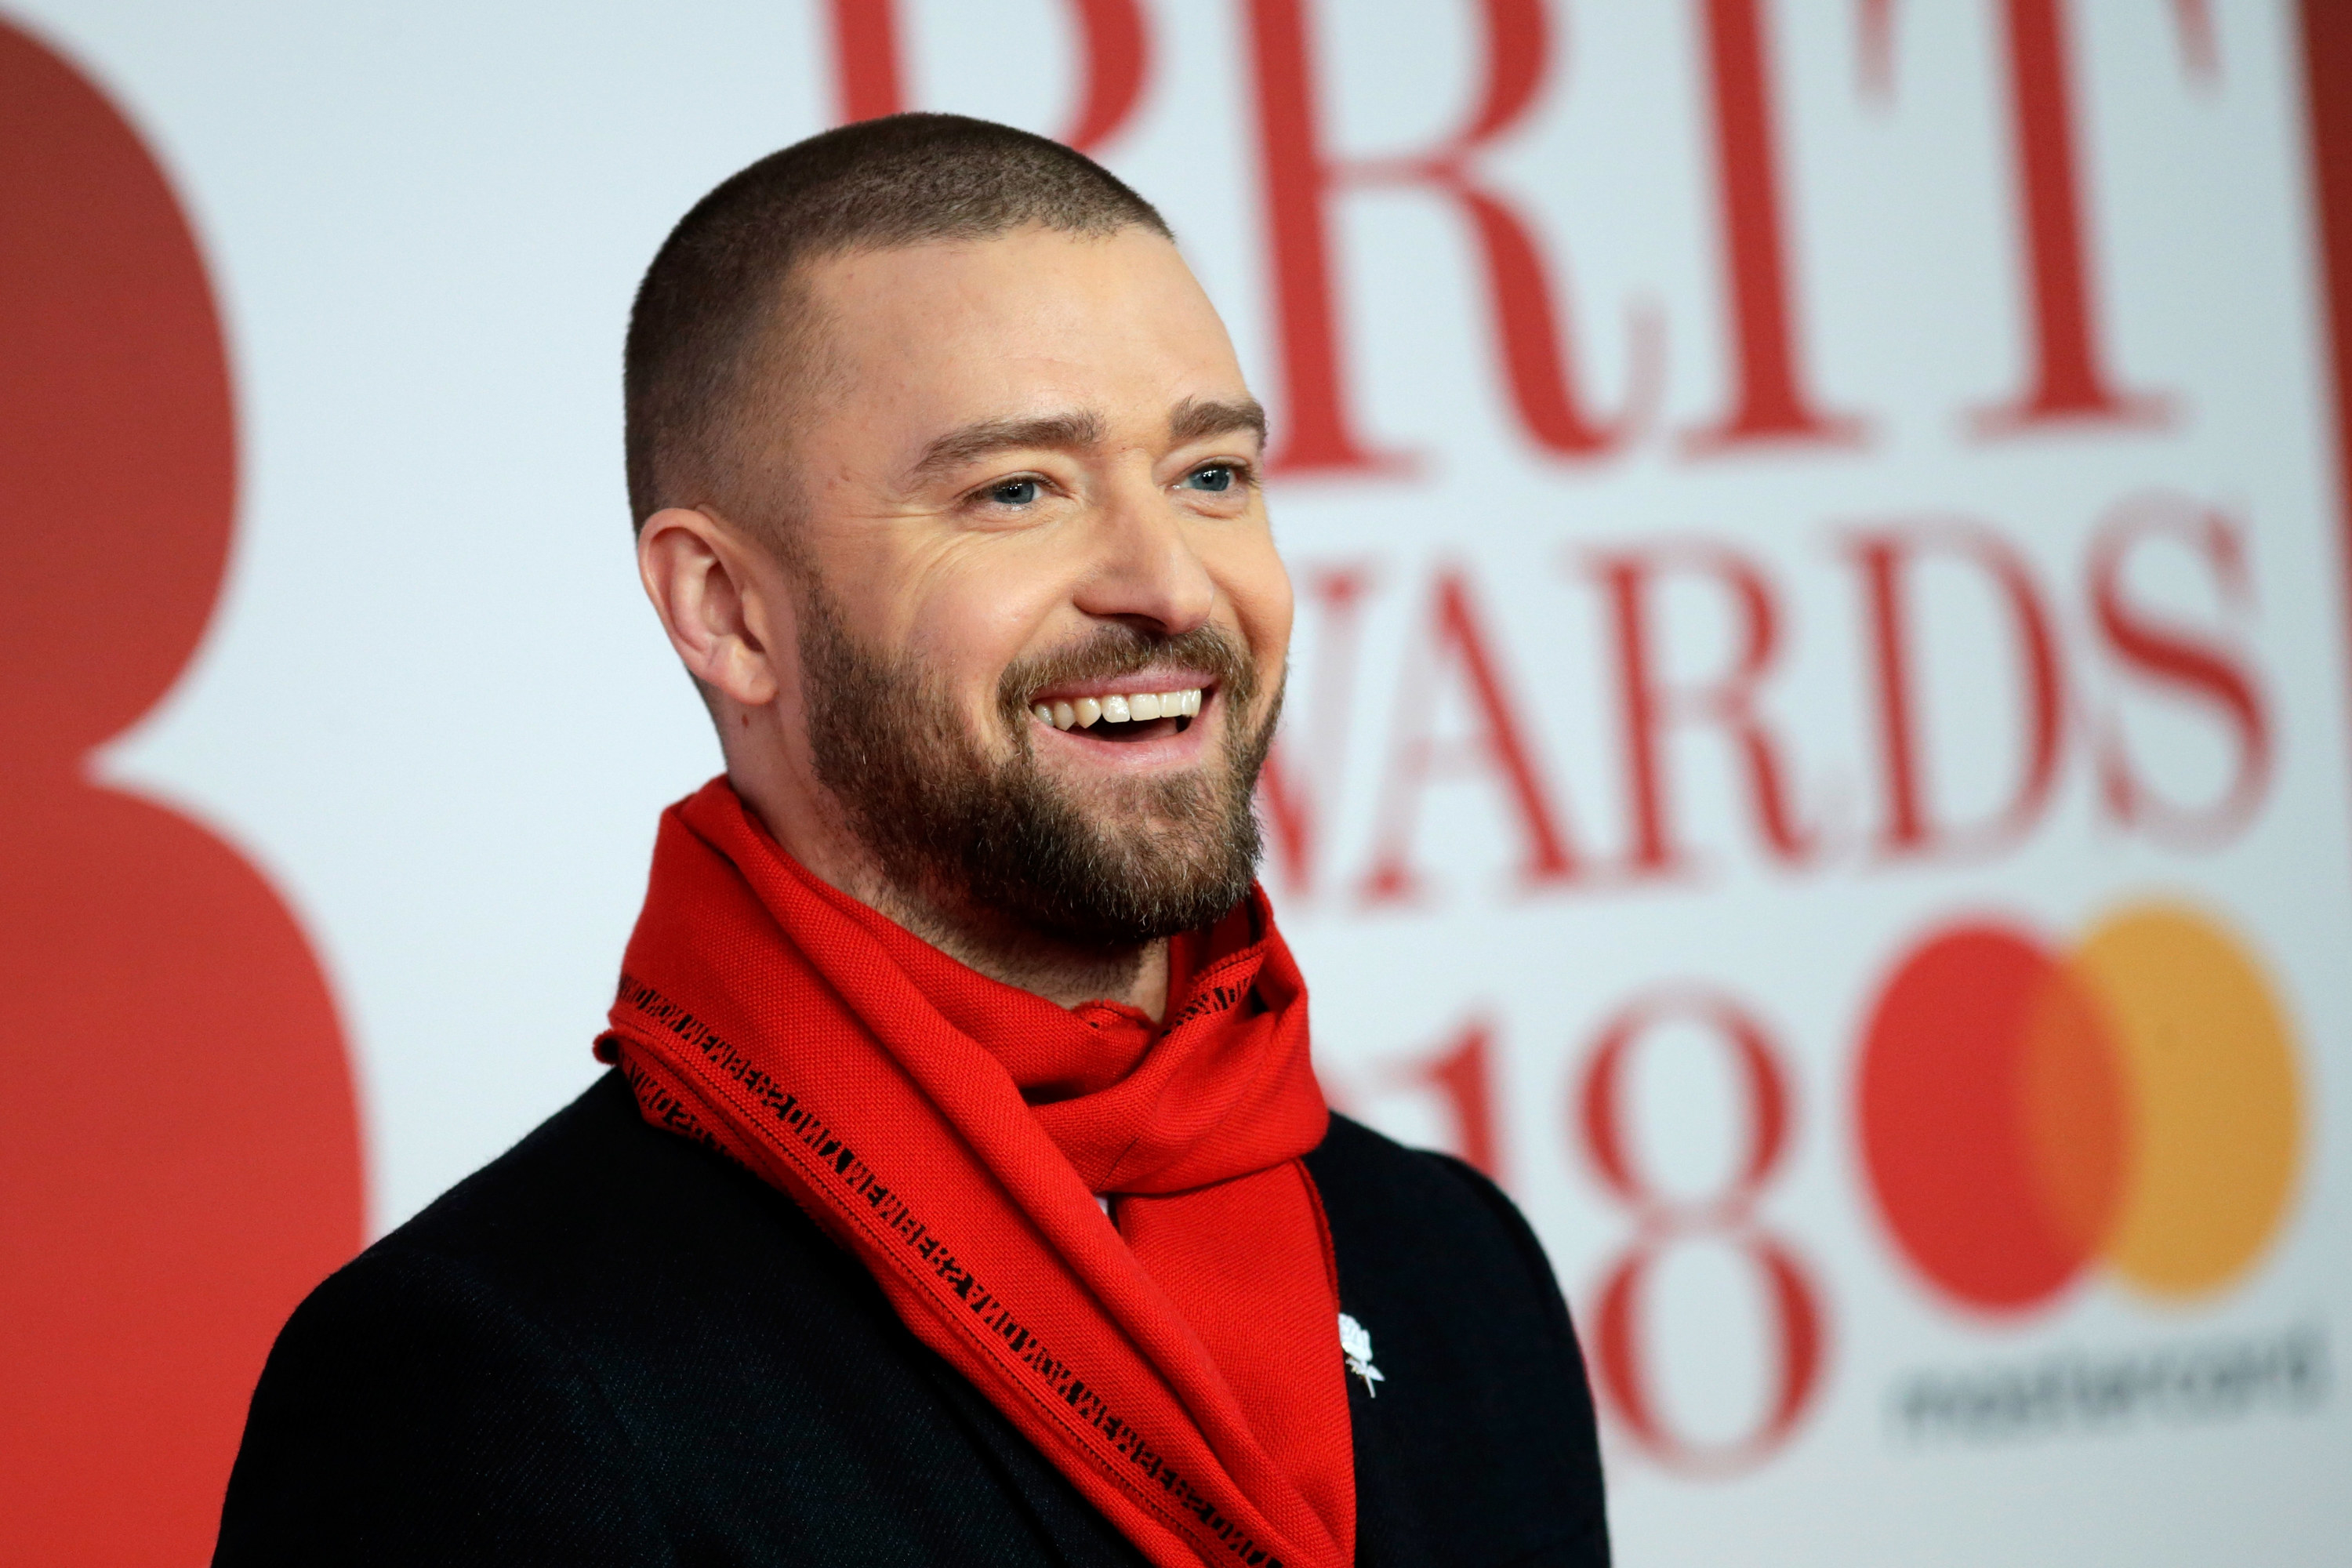 Justin Timberlake attends The BRIT Awards